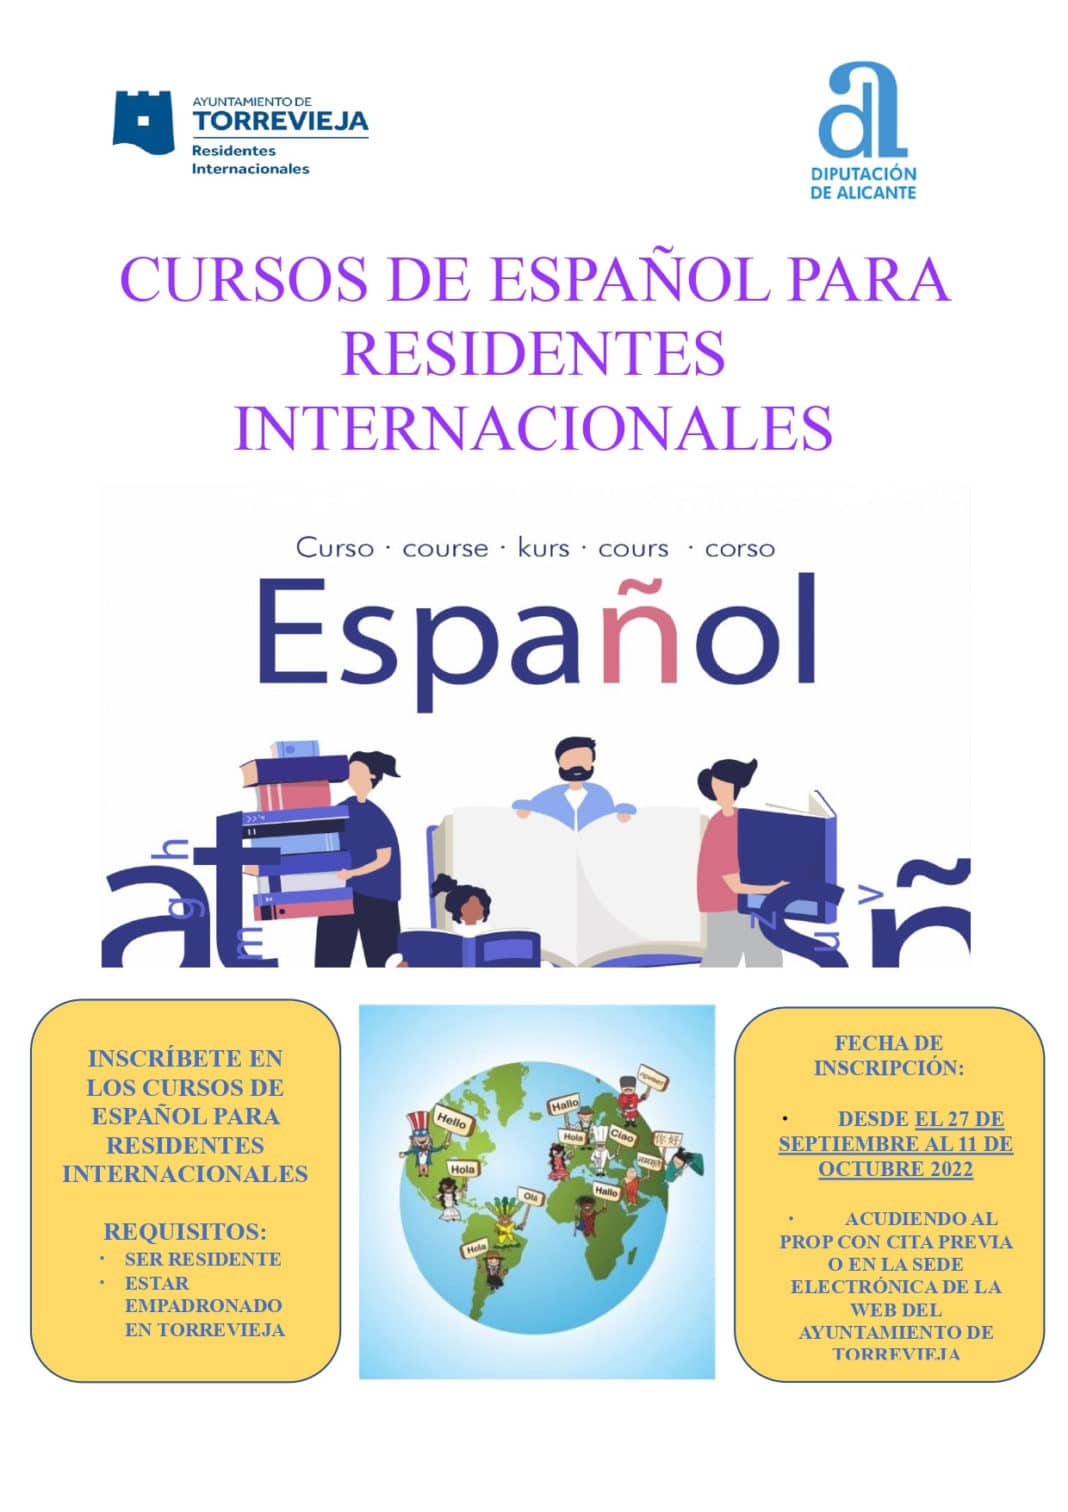 Registration opens for Spanish courses in Torrevieja